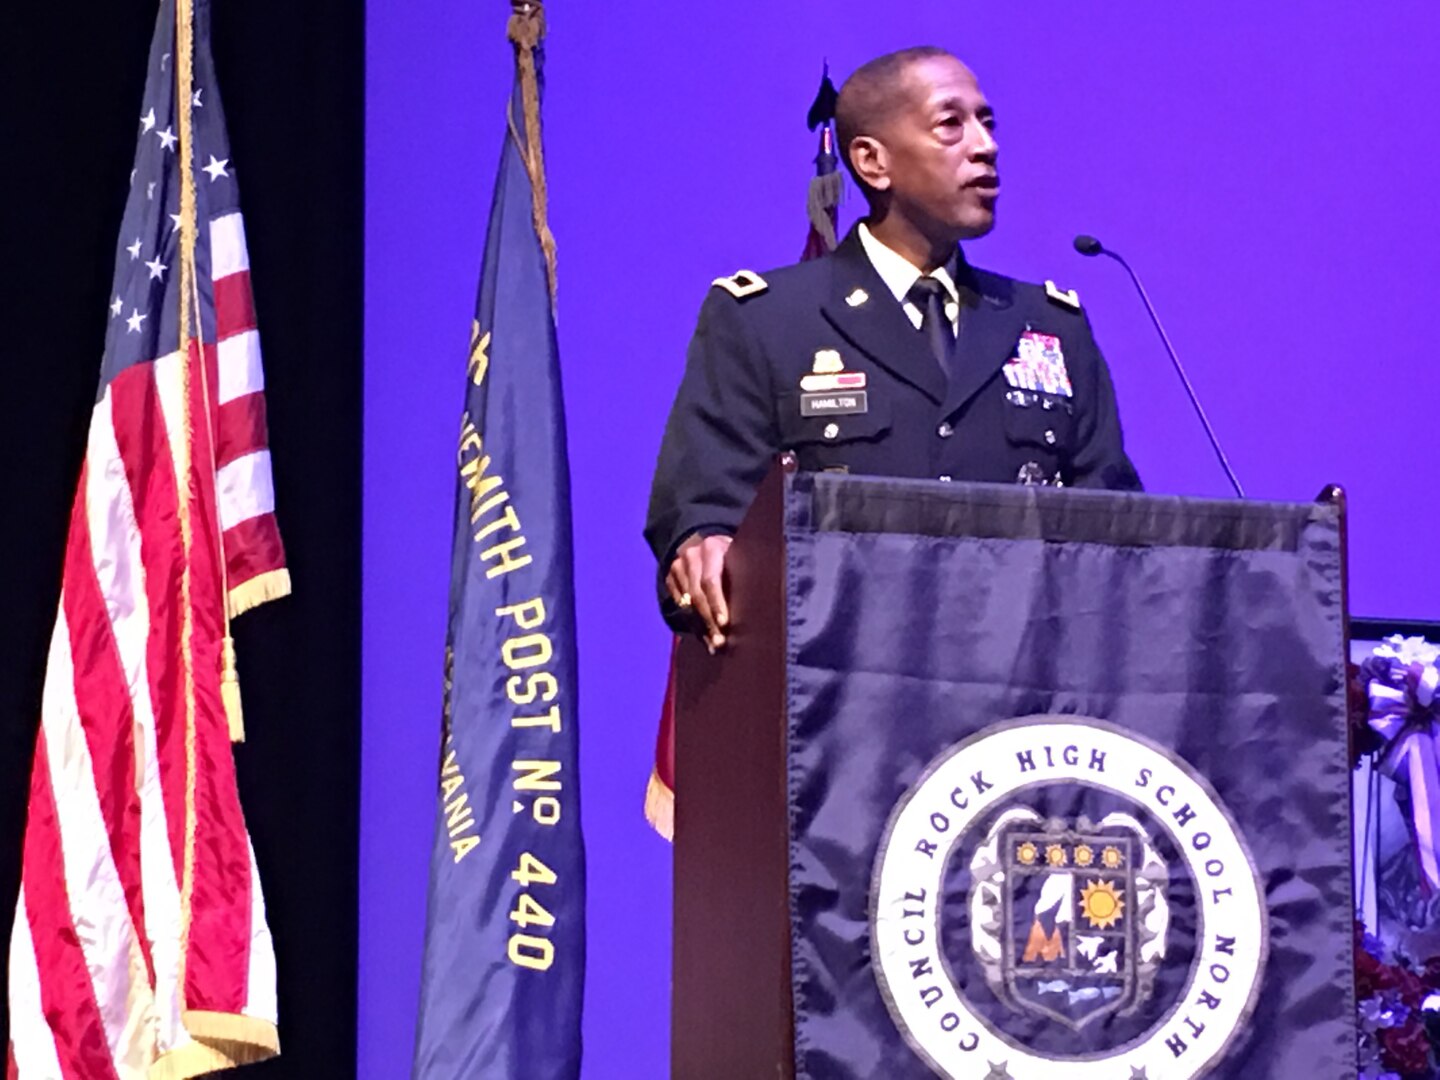 DLA Troop Support Commander Army Brig. Gen. Charles Hamilton speaks to junior and senior high school students at Council Rock North High School in Newtown, Pennsylvania, during a Memorial Day ceremony May 26. The ceremony paid tribute to the school’s 15 graduates who lost their lives in U.S. armed conflicts, along with all of America’s fallen service members. 